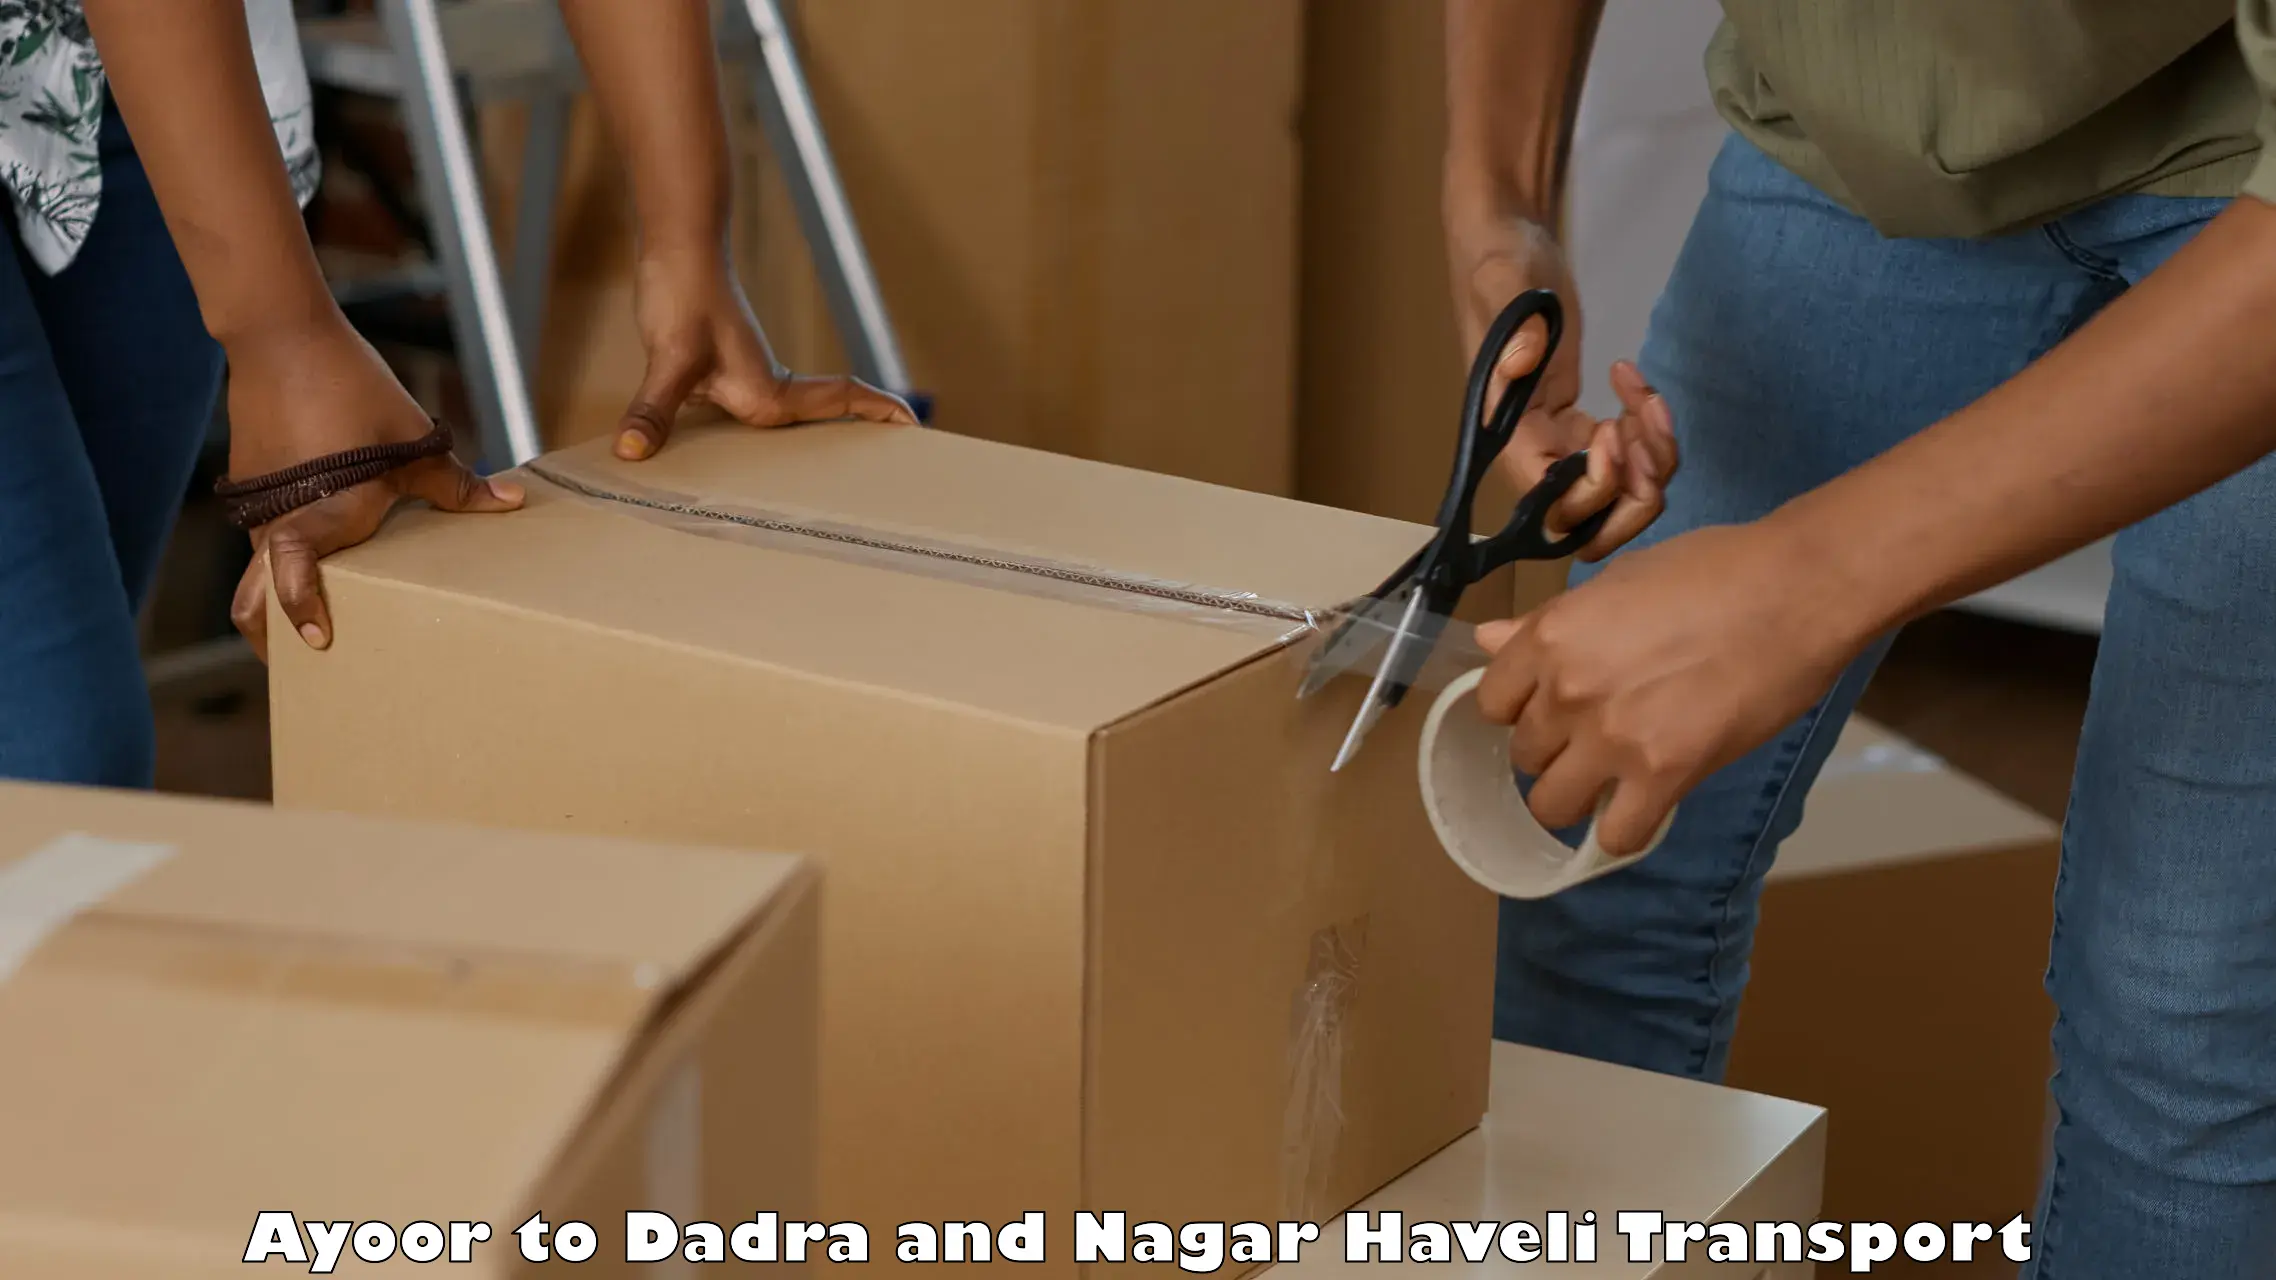 Air freight transport services Ayoor to Dadra and Nagar Haveli